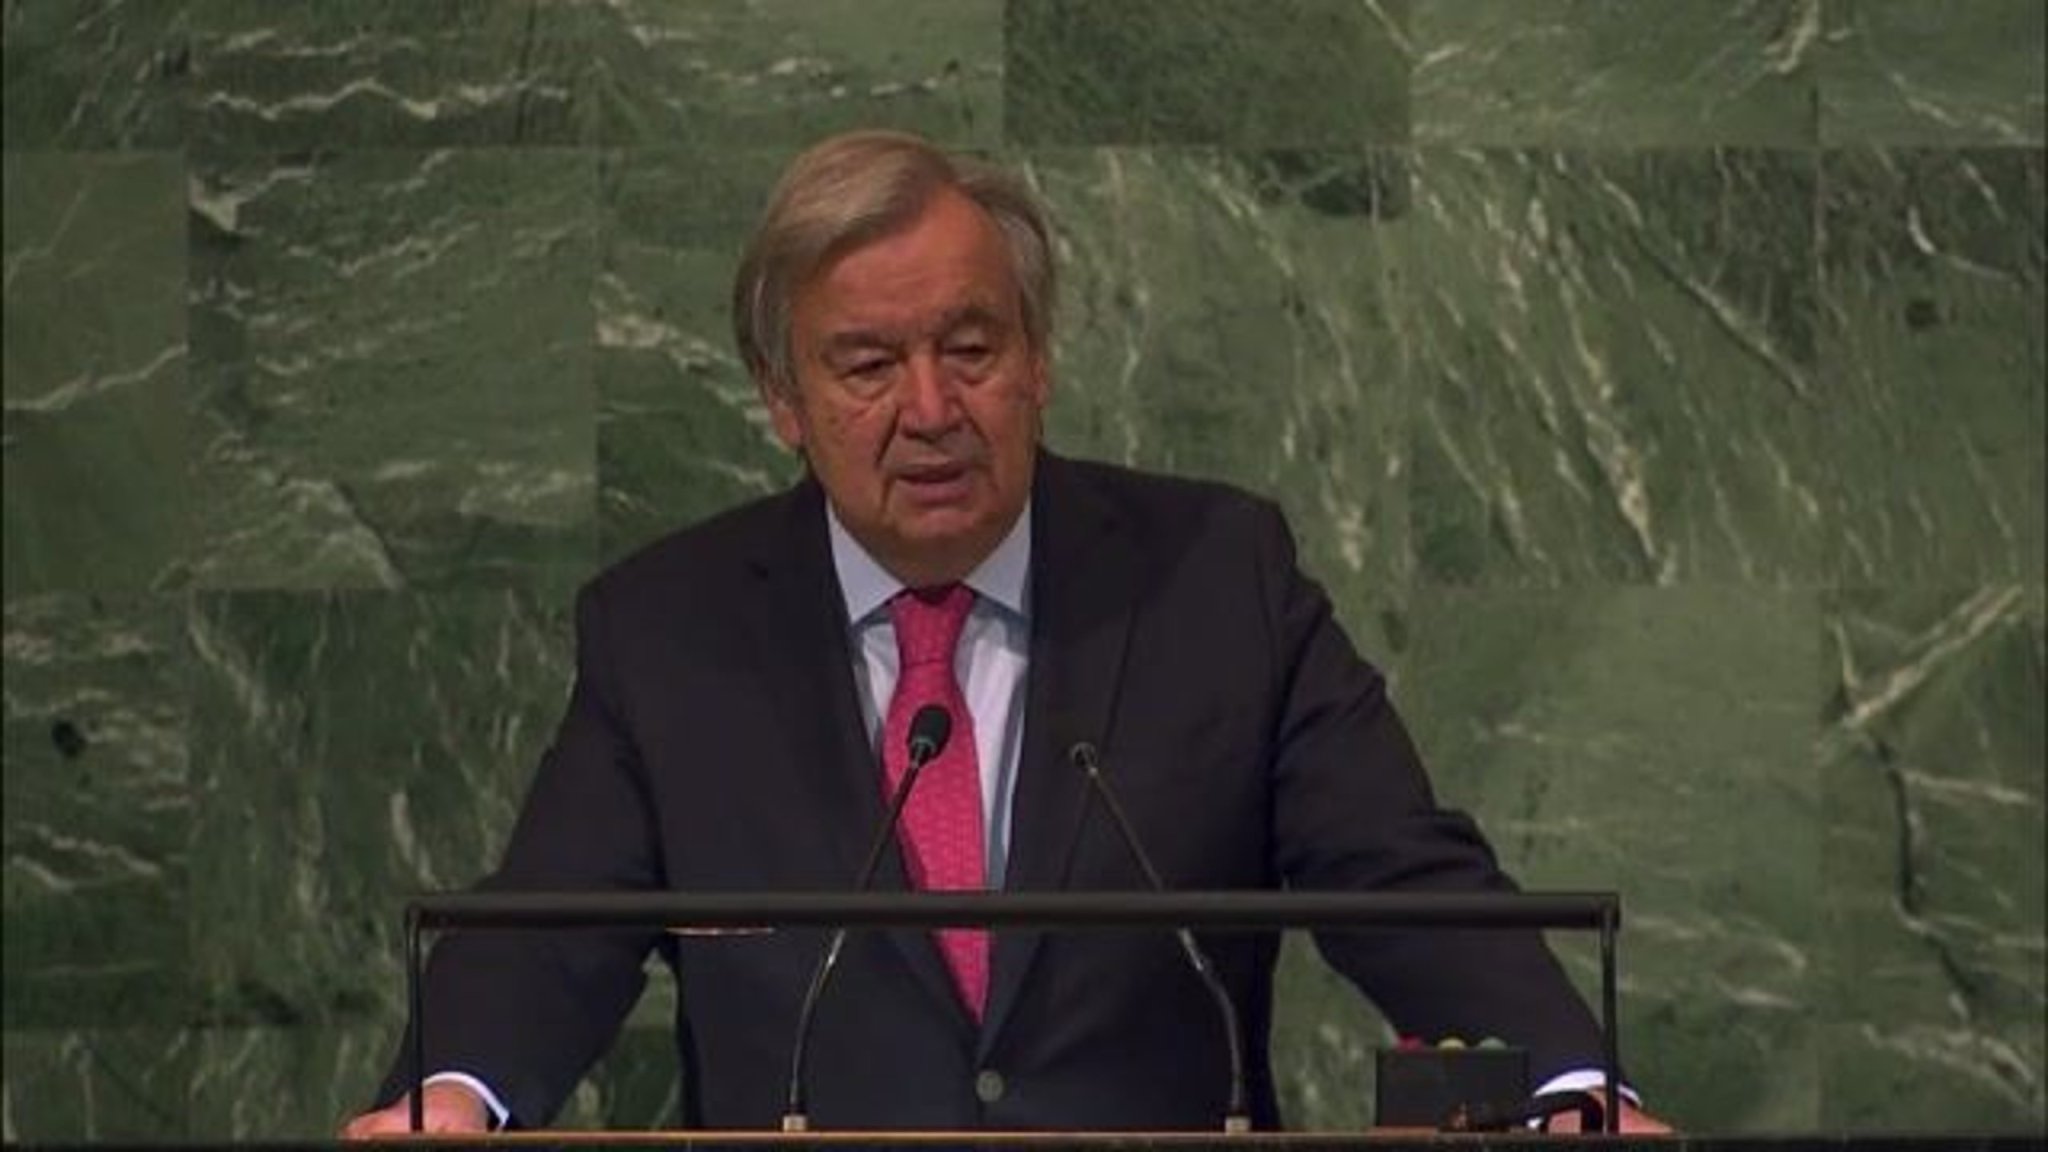 UN Secretary-General António Guterres: “Our world is in big trouble."